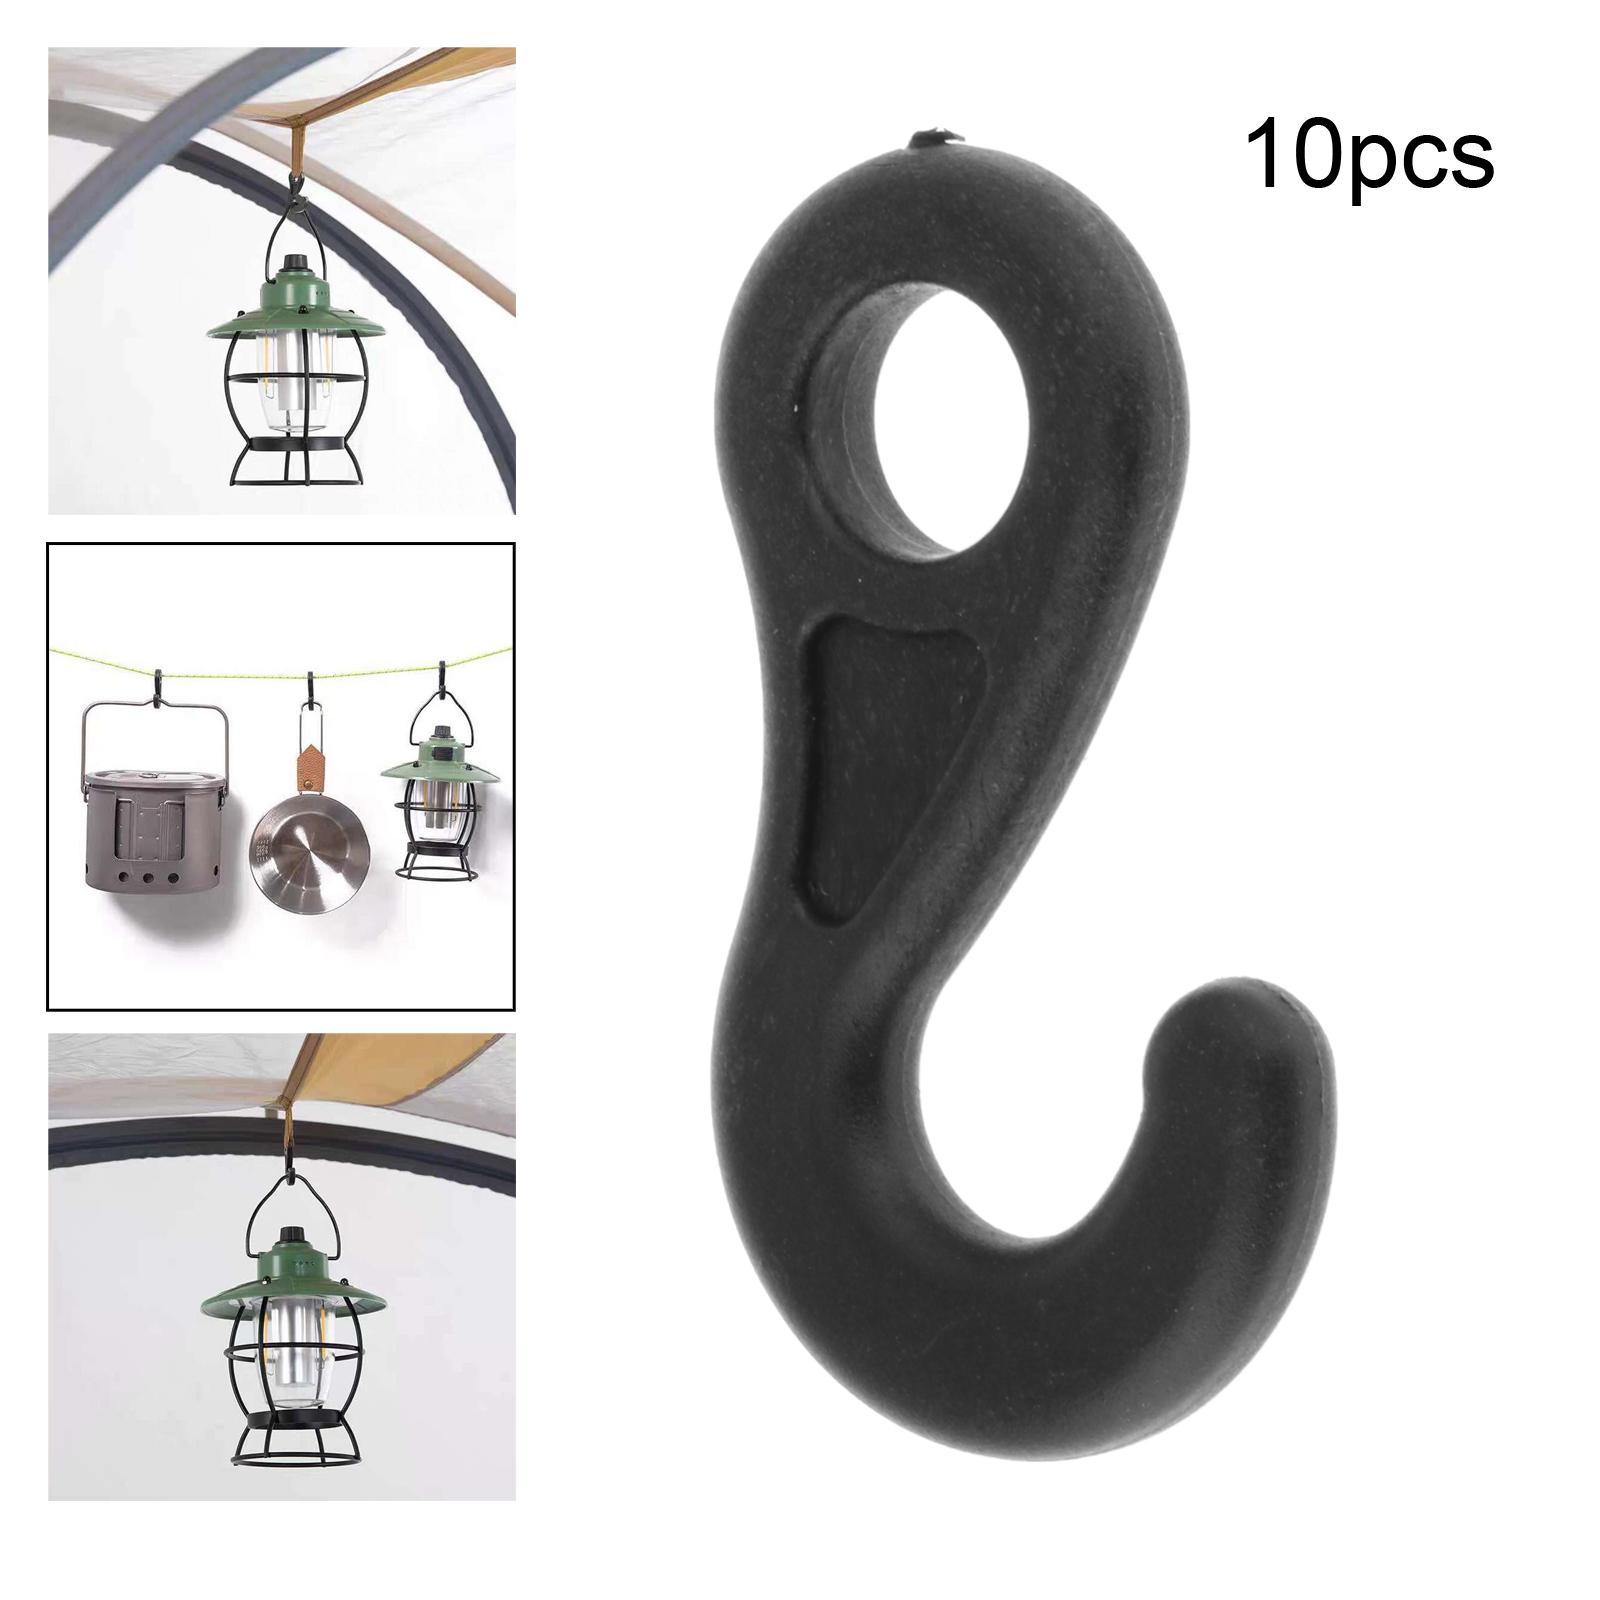 10 Pieces Bungee Cord Hooks Elastic Rope Hook Lamp Holder Hooks Tent Hooks Shock Cord End Hooks for Auto Boating Fixing Hooks